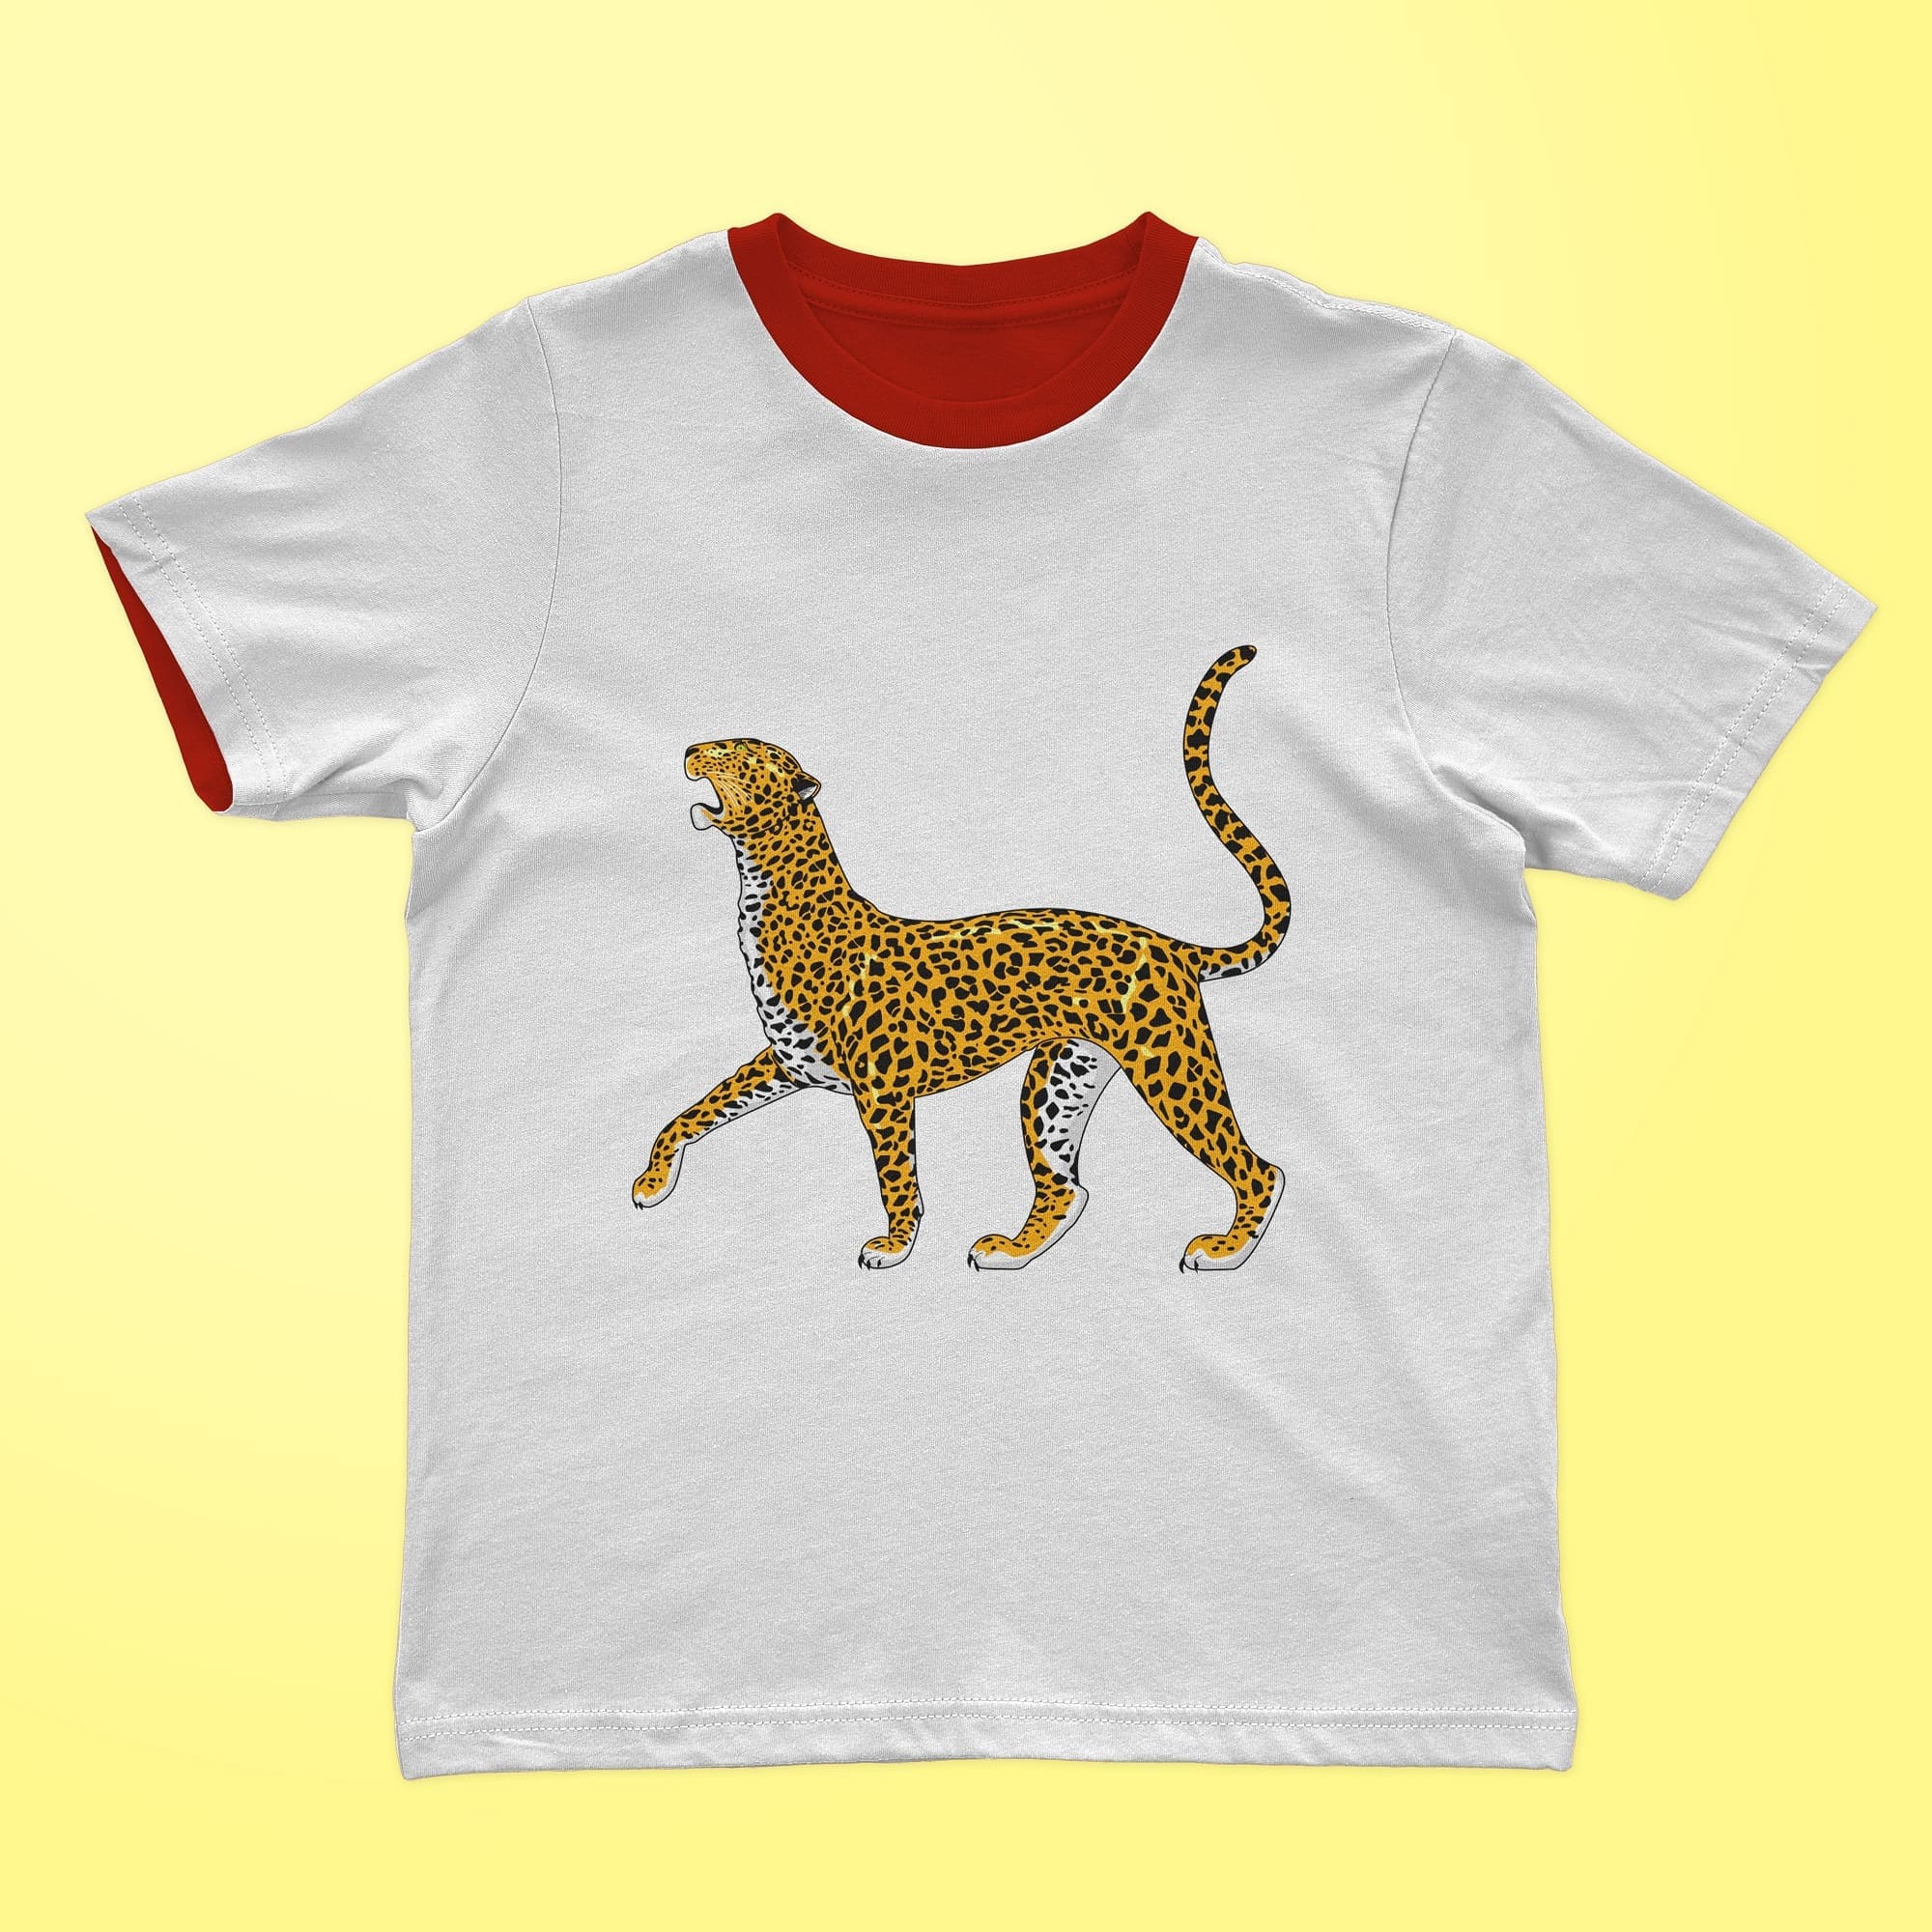 A cool t-shirt with a proud leopard print.